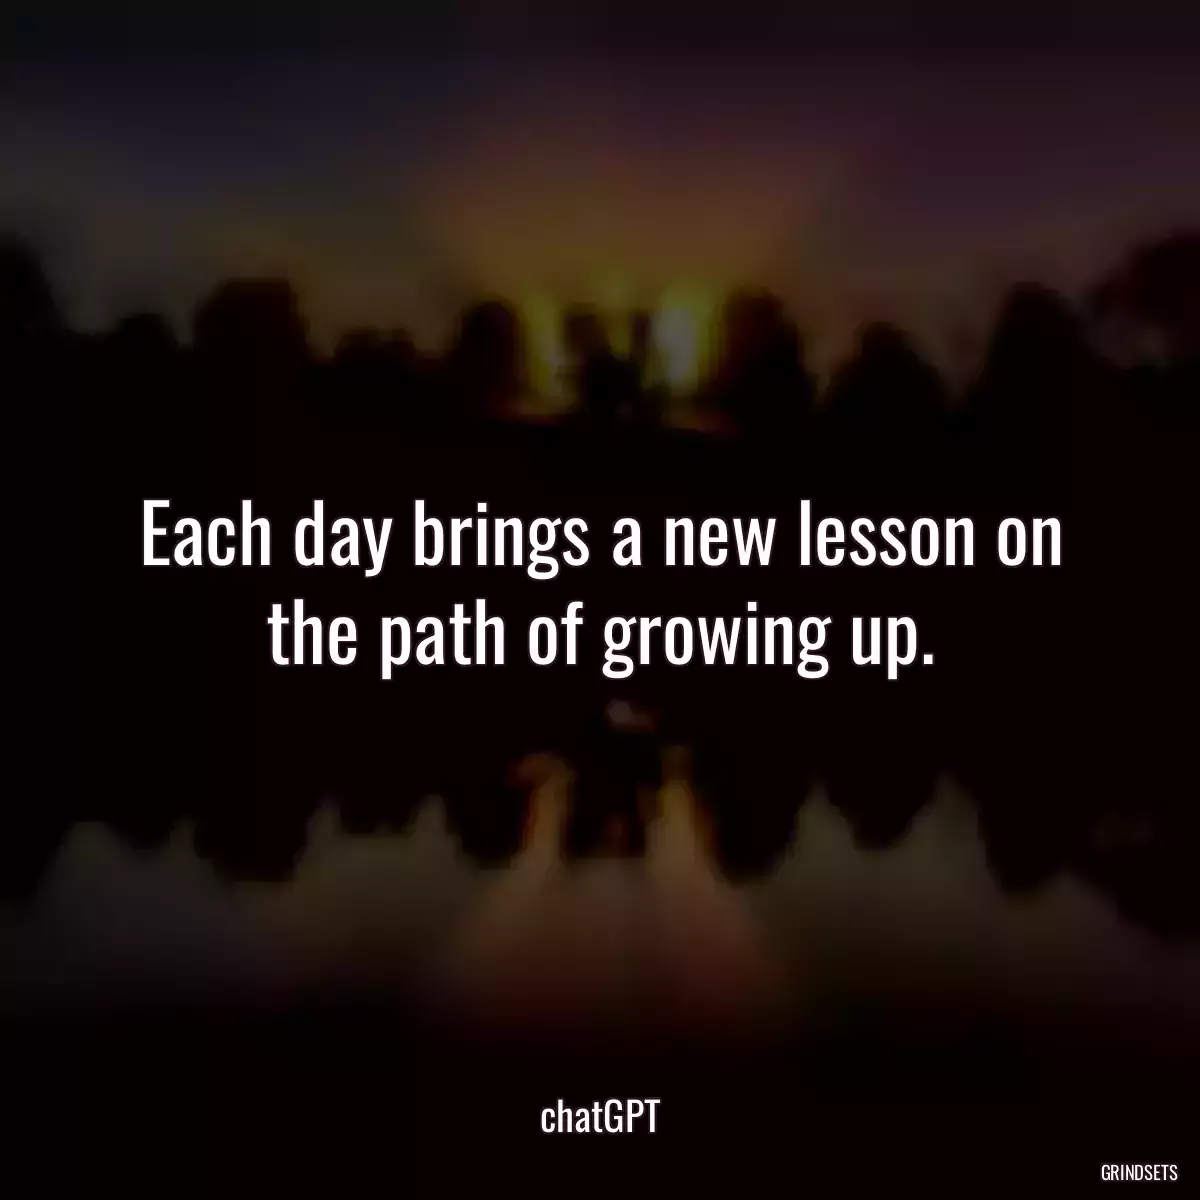 Each day brings a new lesson on the path of growing up.